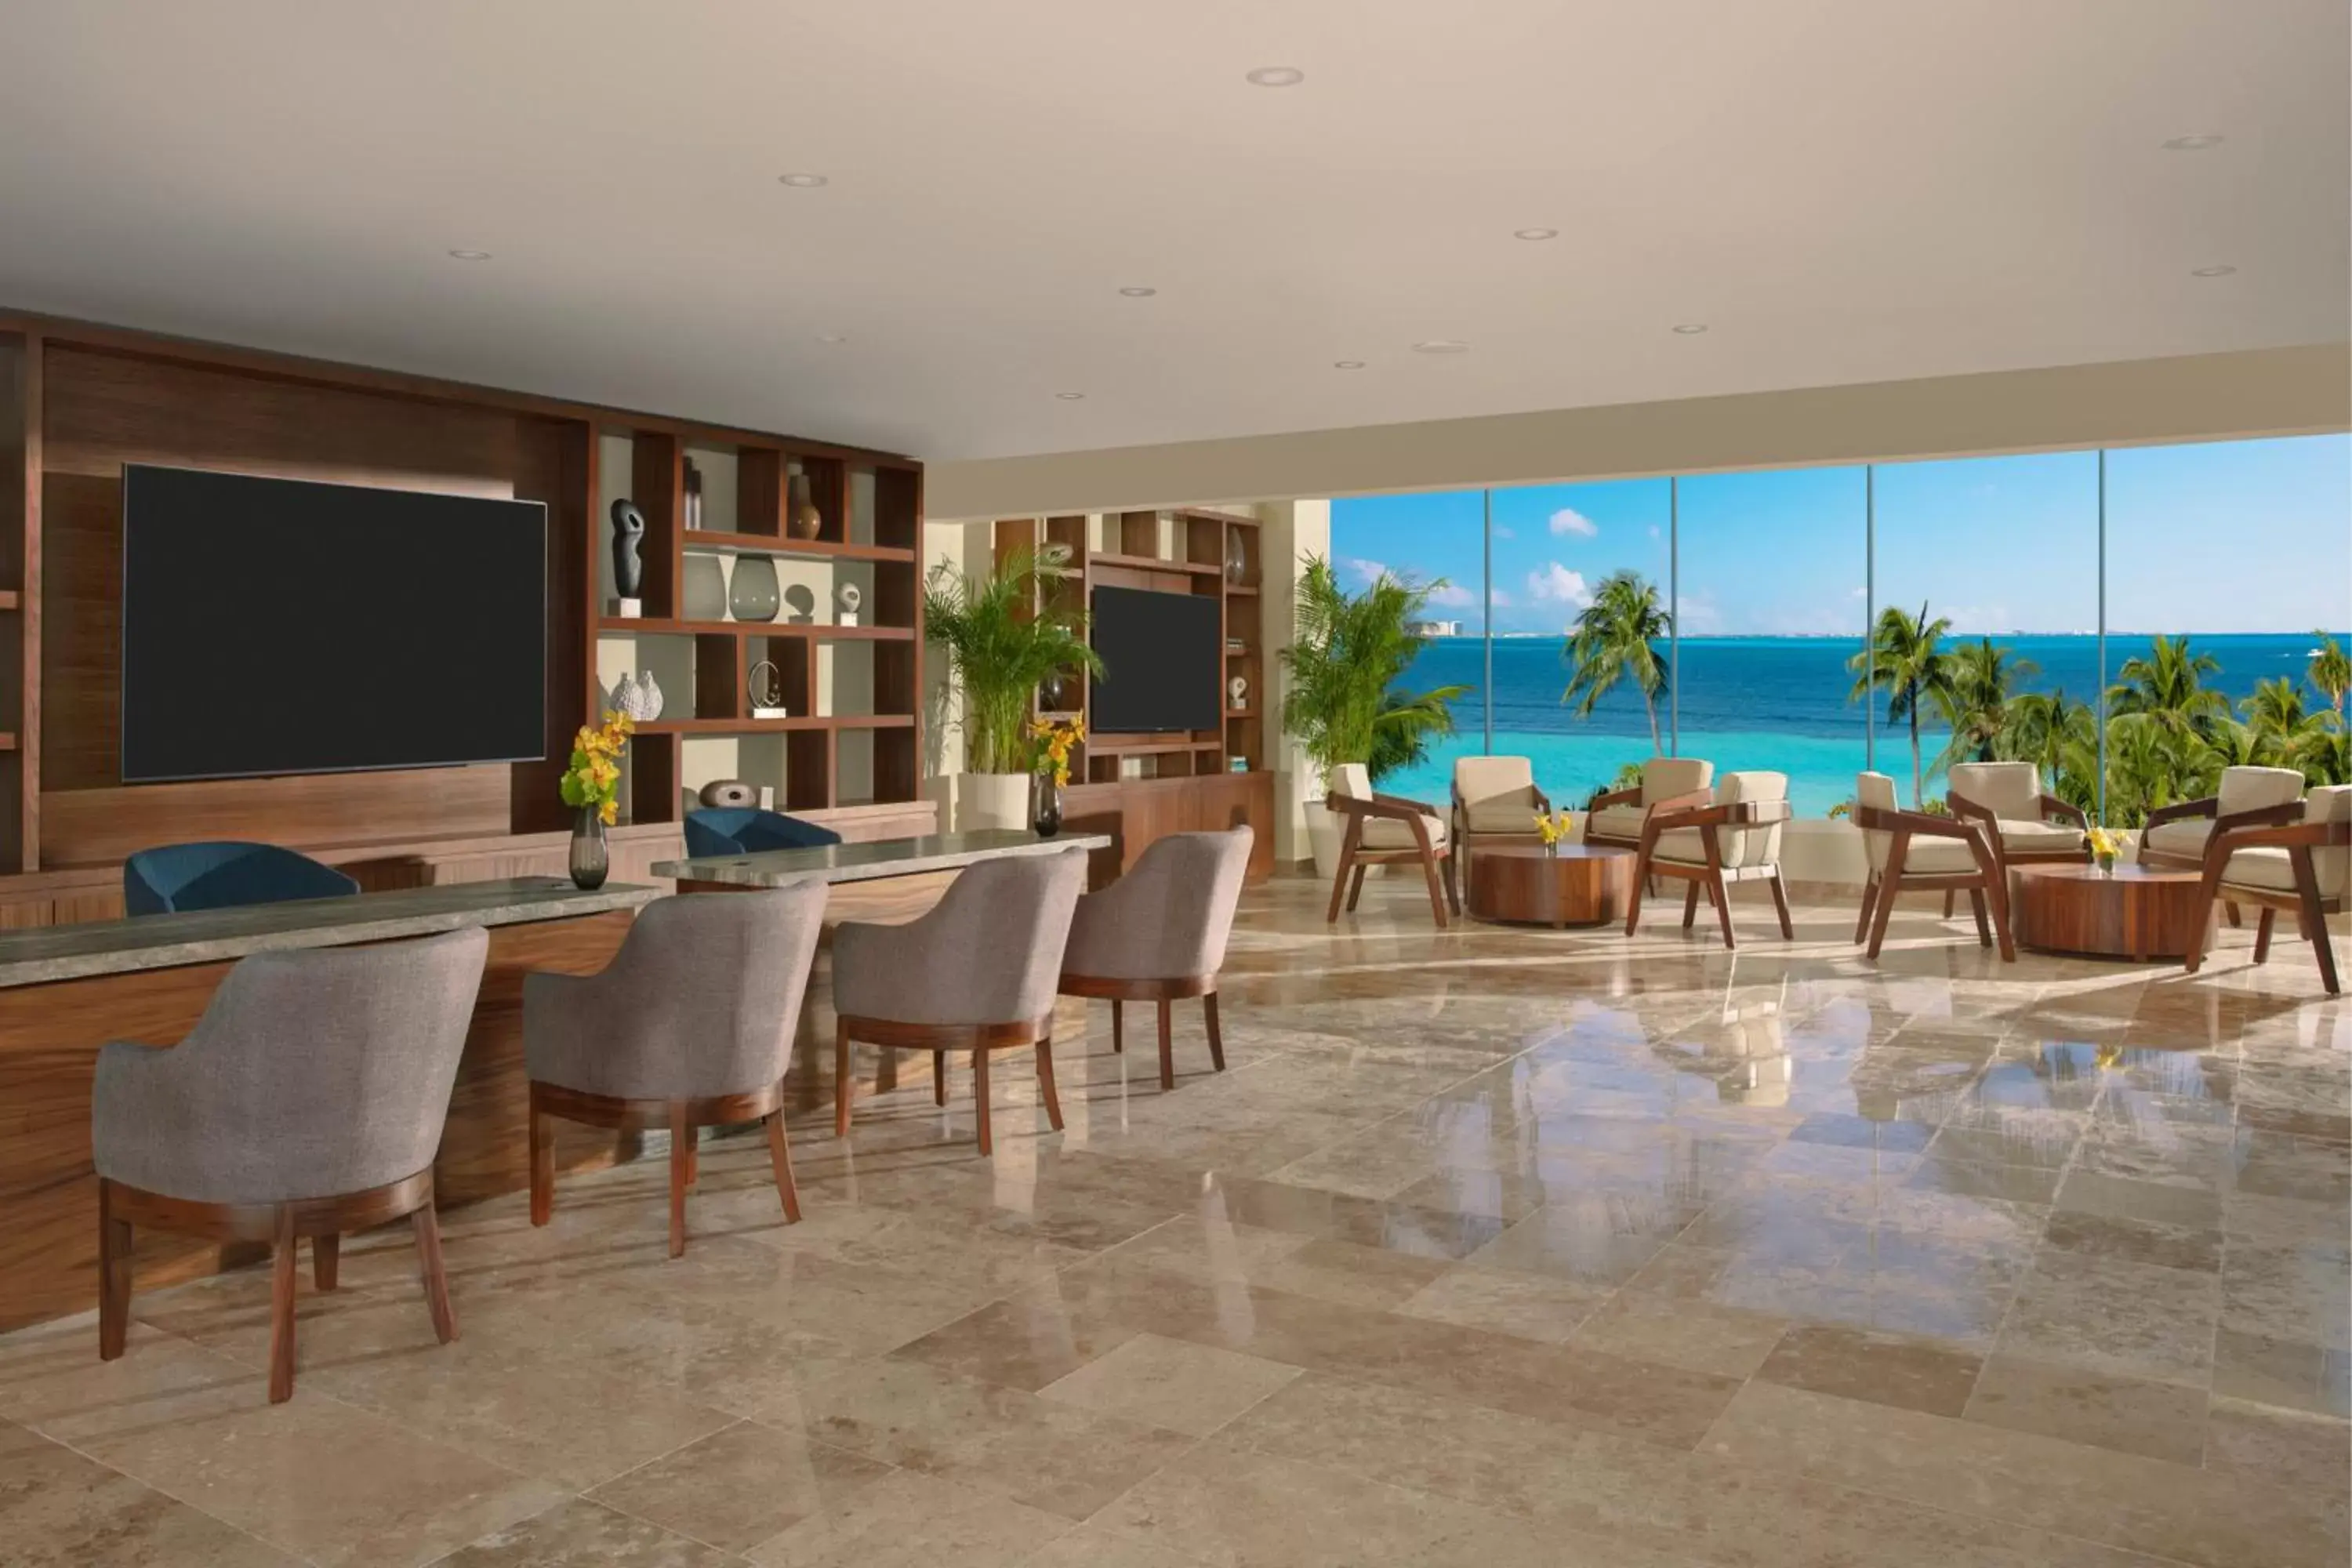 Lobby or reception in Dreams Sands Cancun Resort & Spa